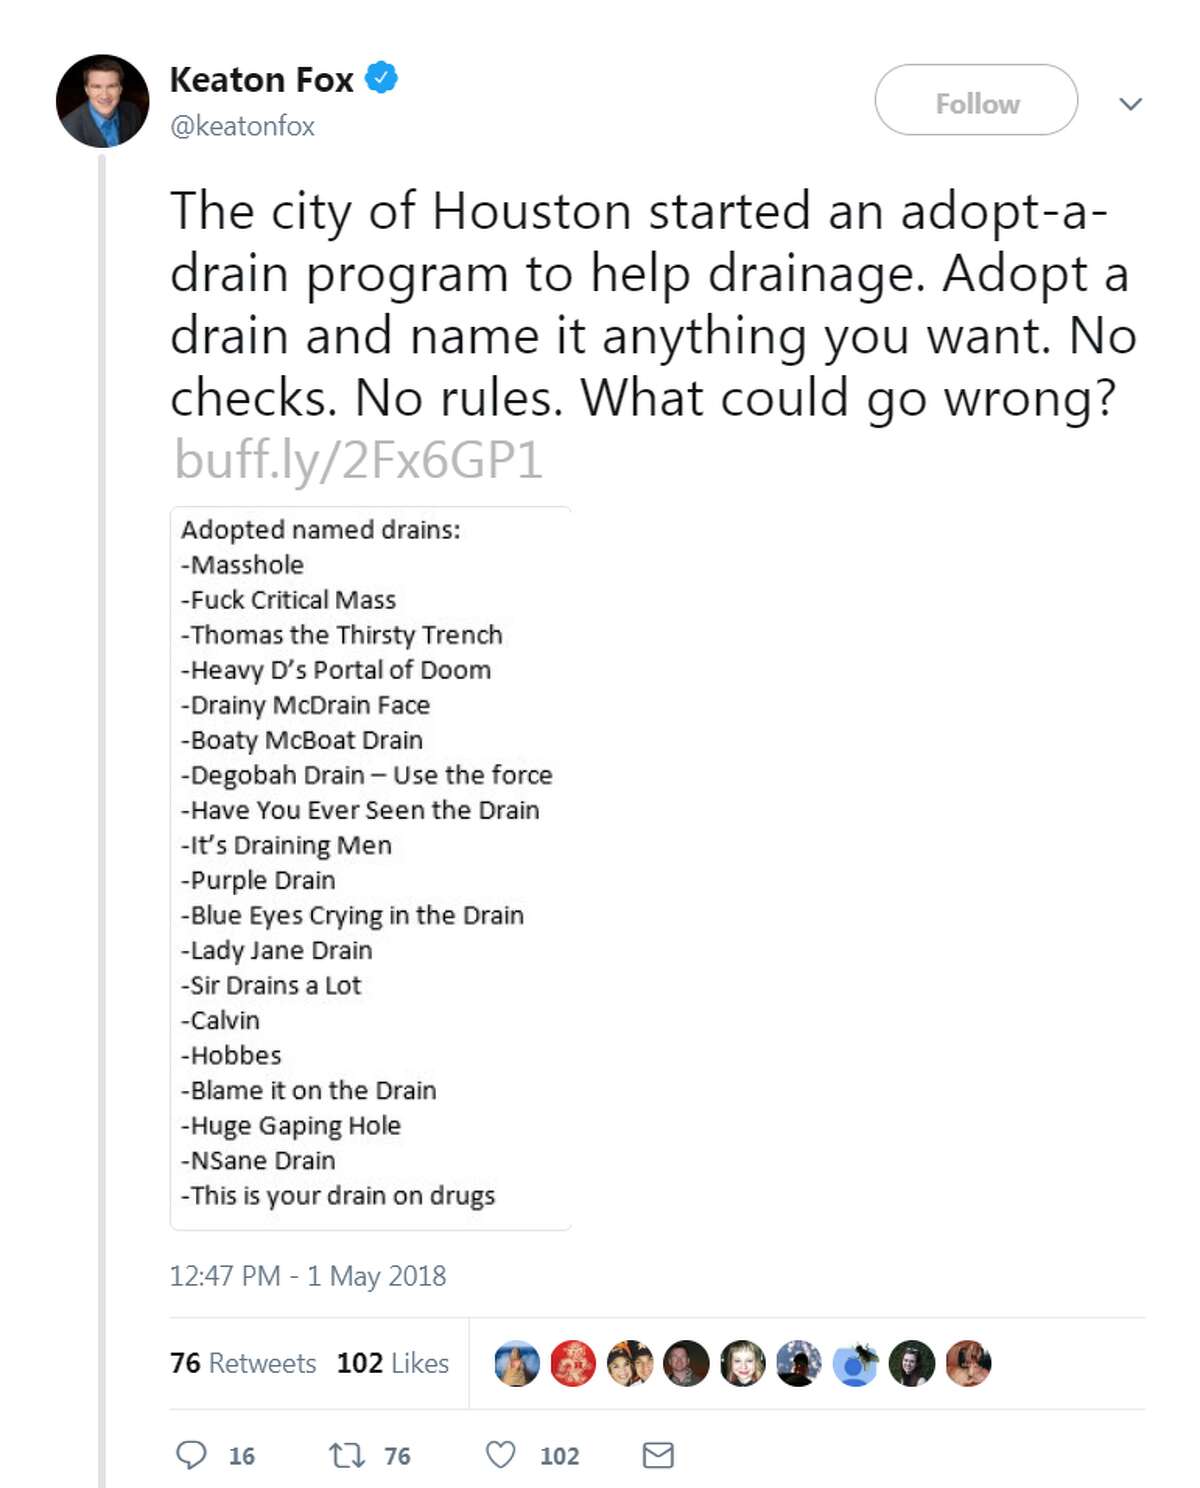 The city of Houston's adopt-a-drain program is quickly devolving into a hilarious game of who can come up with the best nickname.